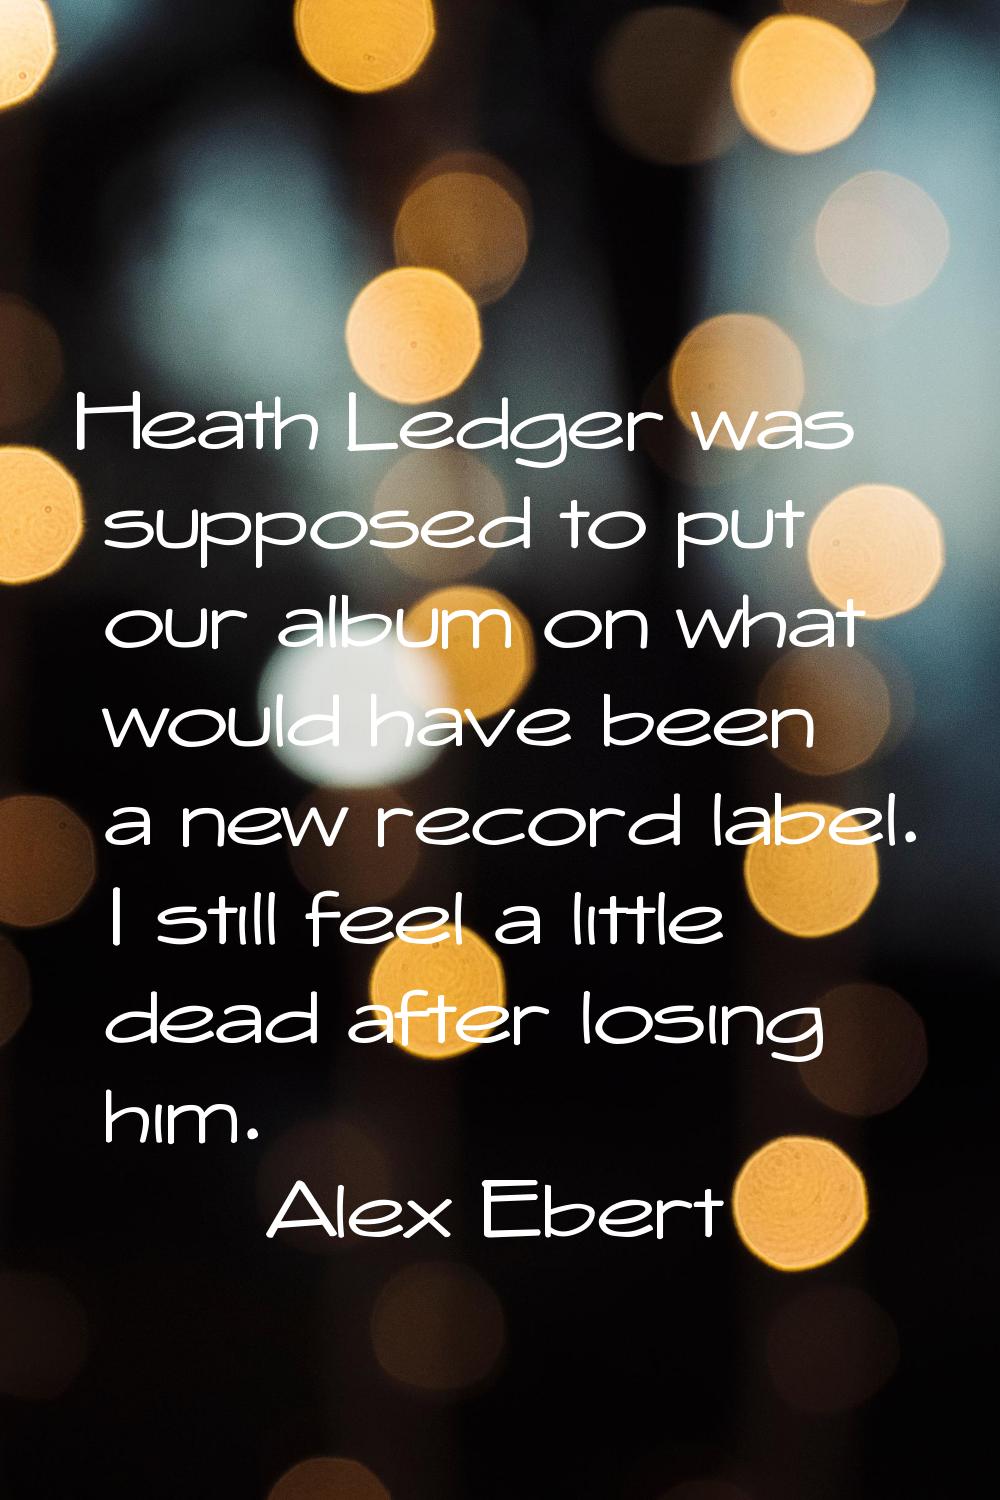 Heath Ledger was supposed to put our album on what would have been a new record label. I still feel